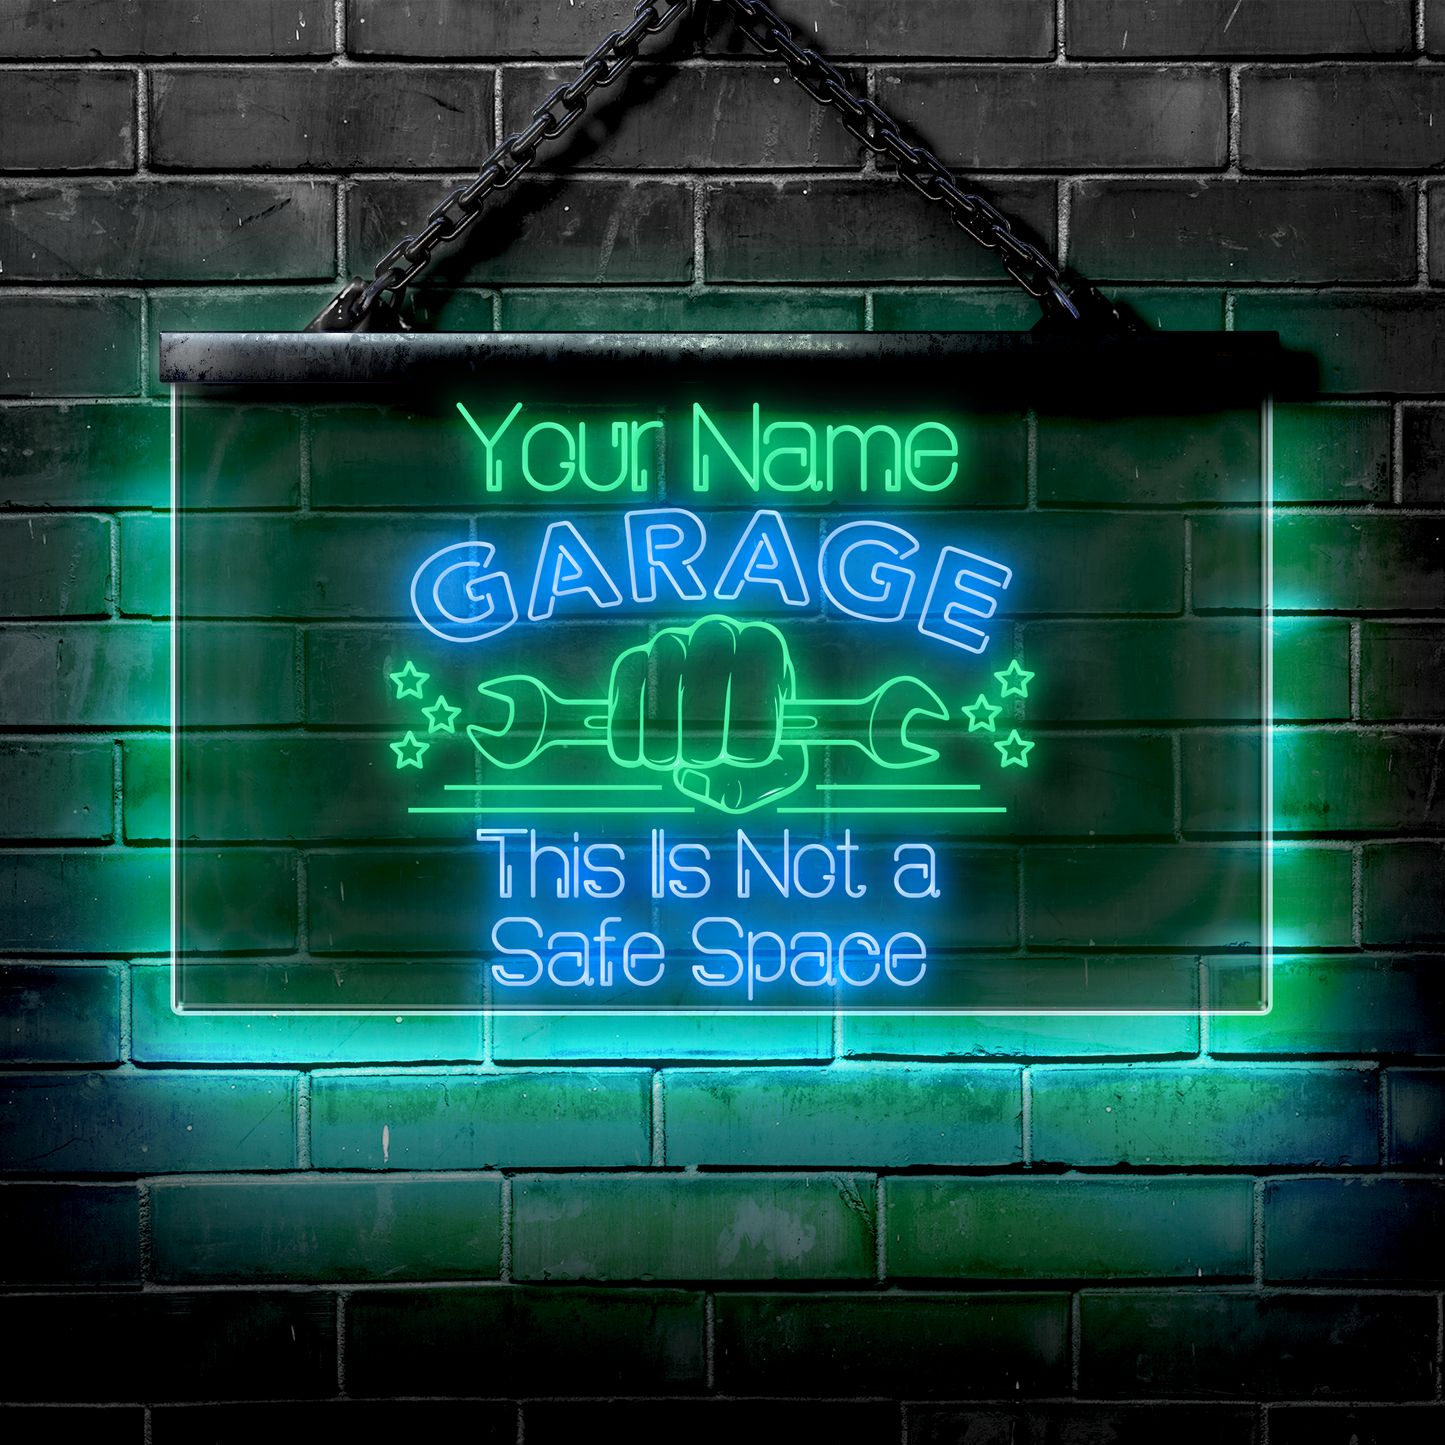 Personalized LED Garage Sign: This Is Not a Safe Space